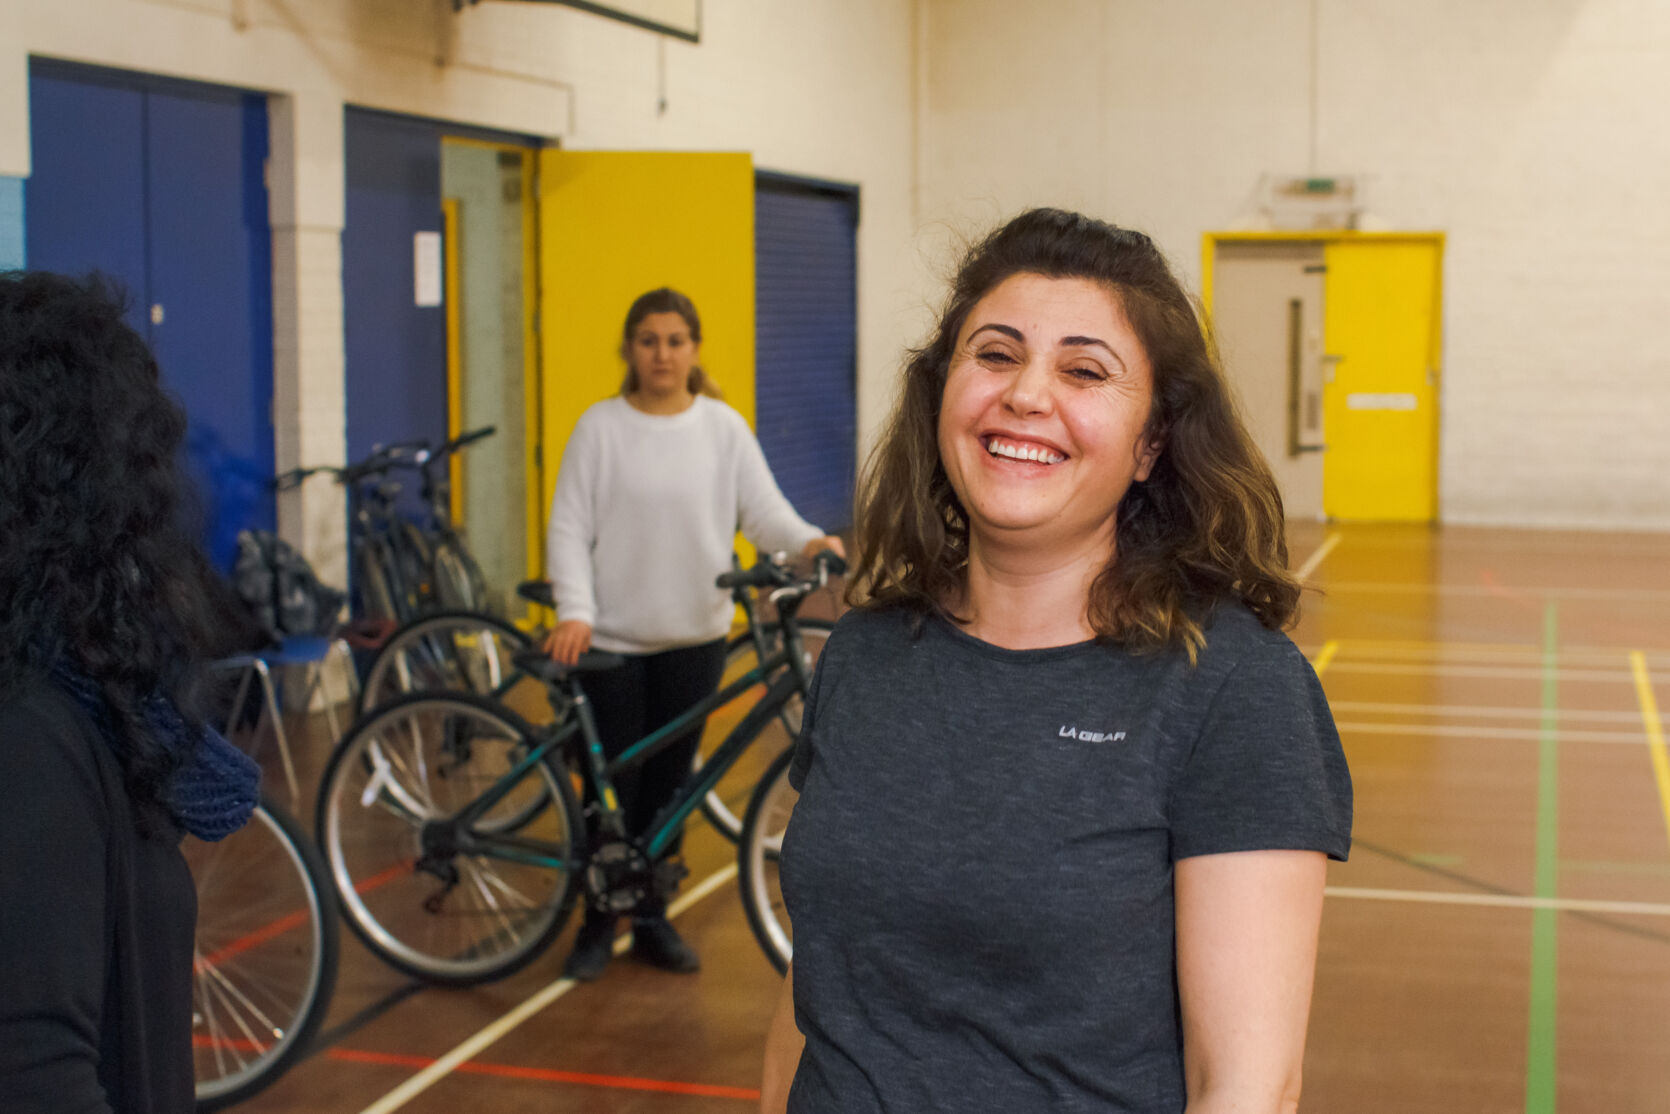 A women standing in a sports hall smiling at the camera. Behind her two other people holding bicycles - one is looking at the camera and the other has their back to us.